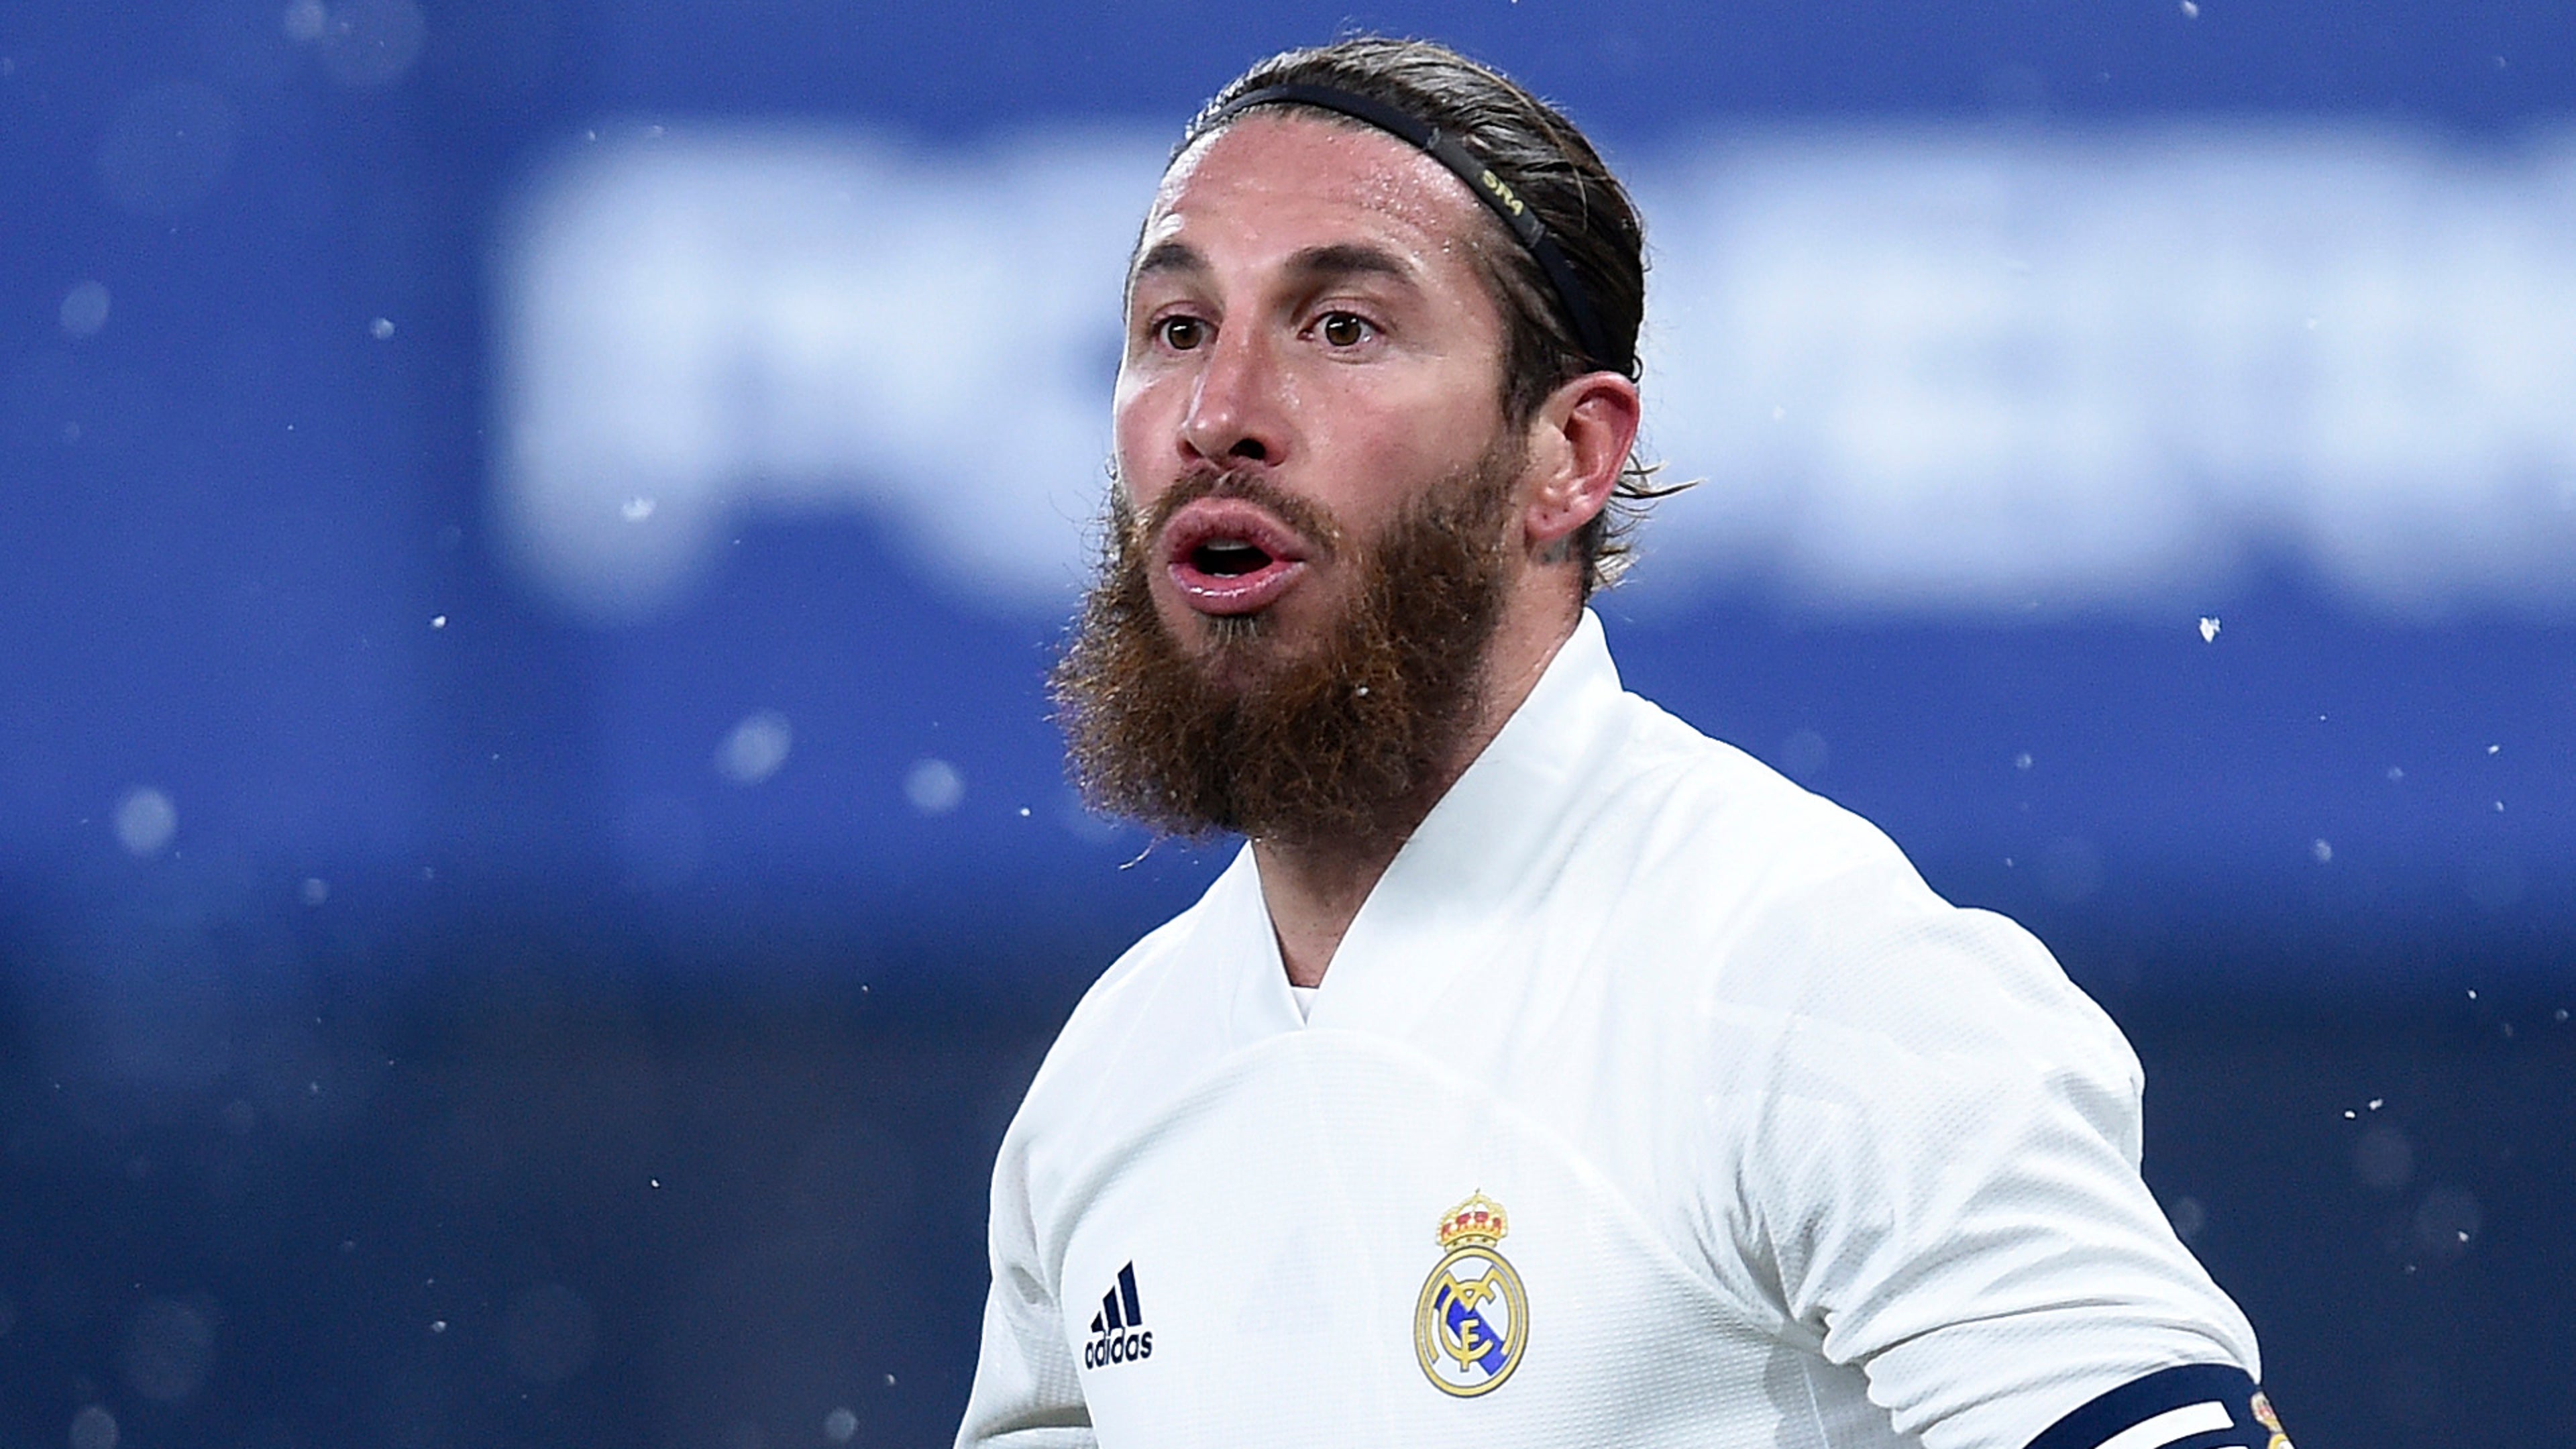 Ramos had 'no other option' but to undergo surgery as Real Madrid